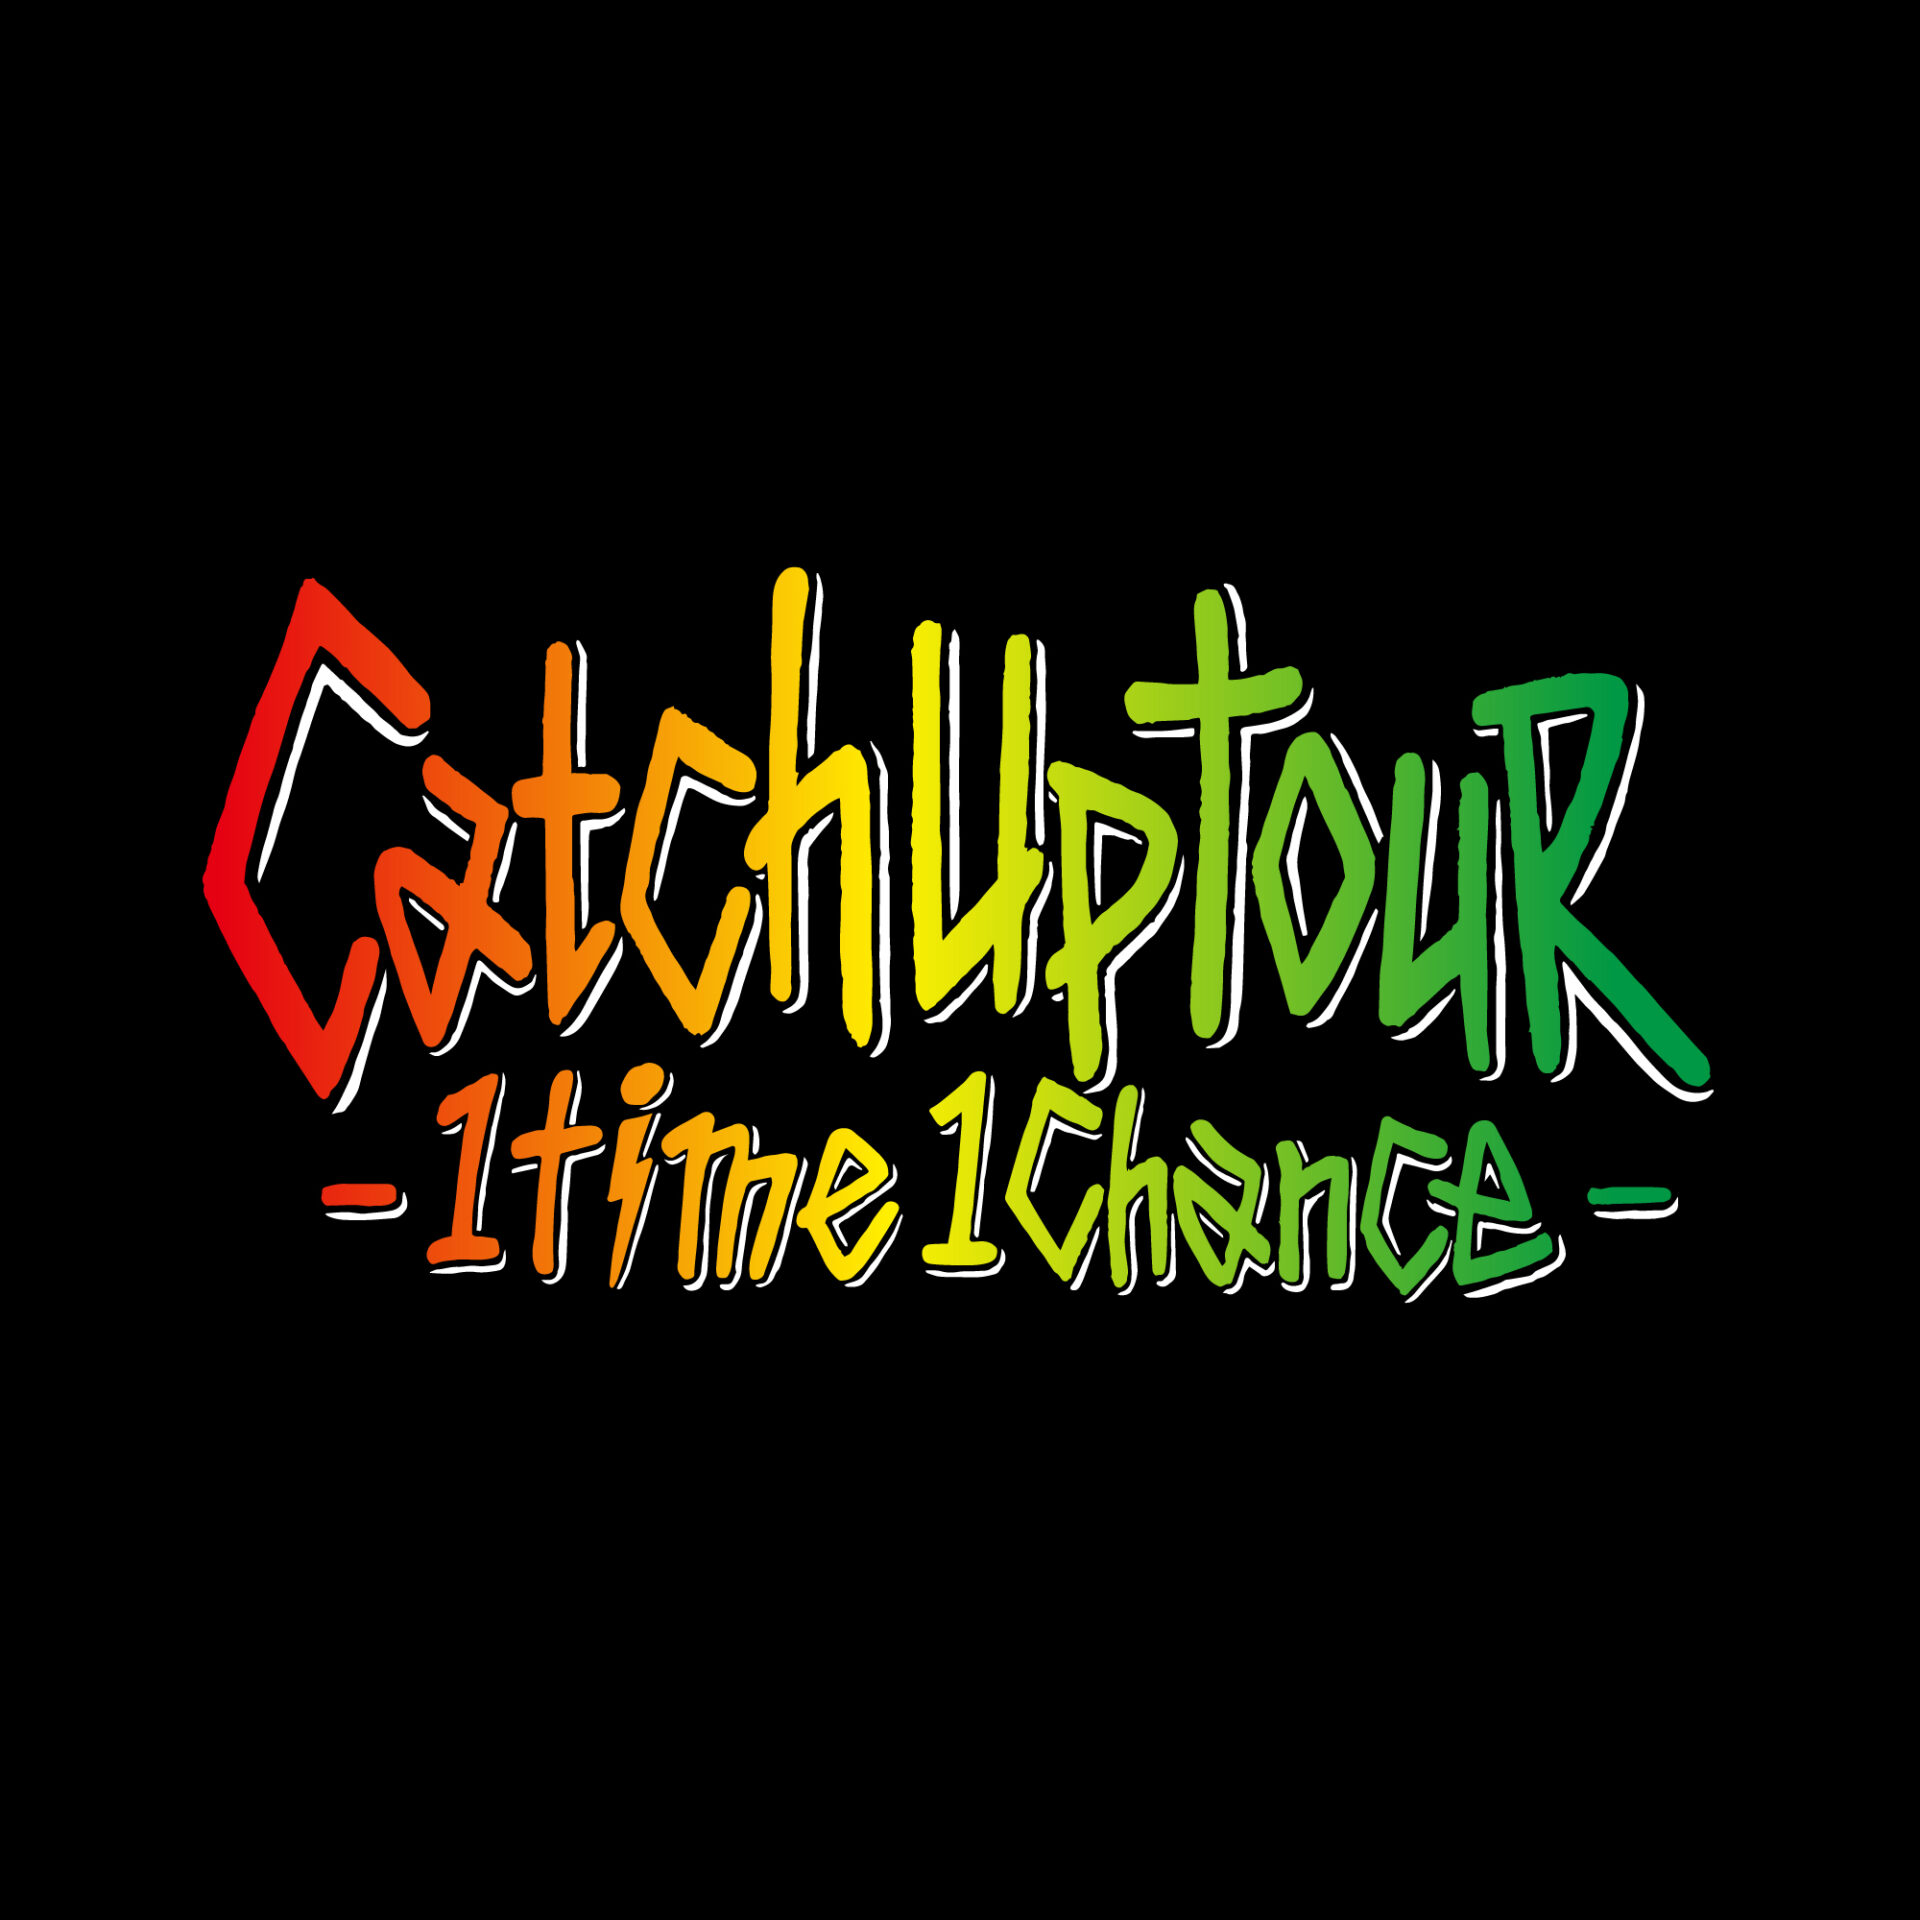 Catch Up TOUR -1 Time 1 Chance-